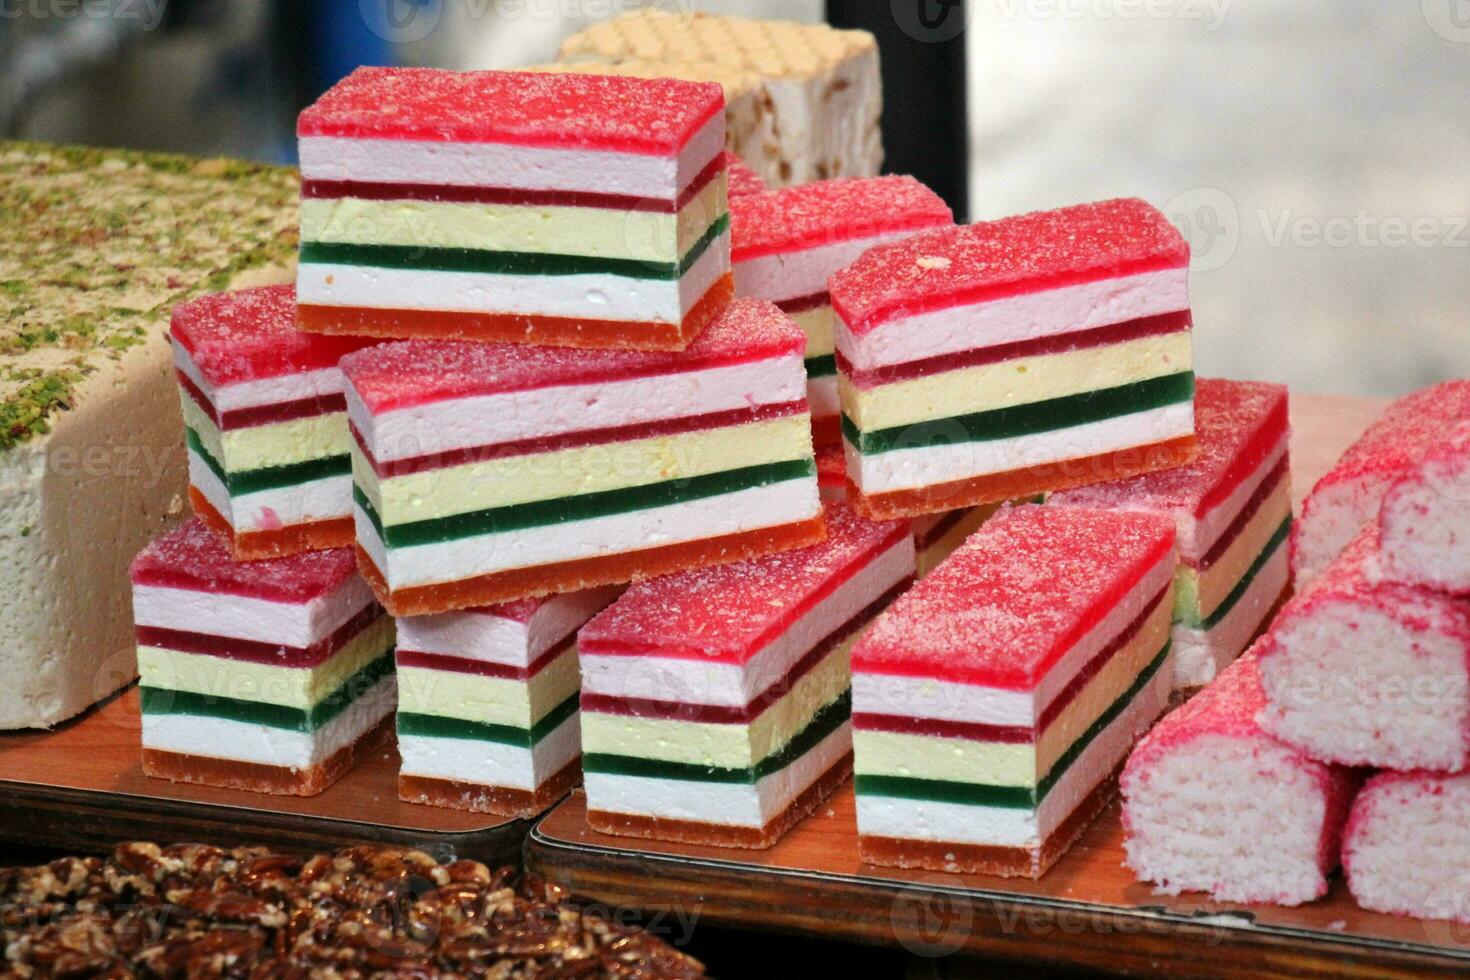 Oriental sweets and candies are sold at a bazaar in Israel. photo